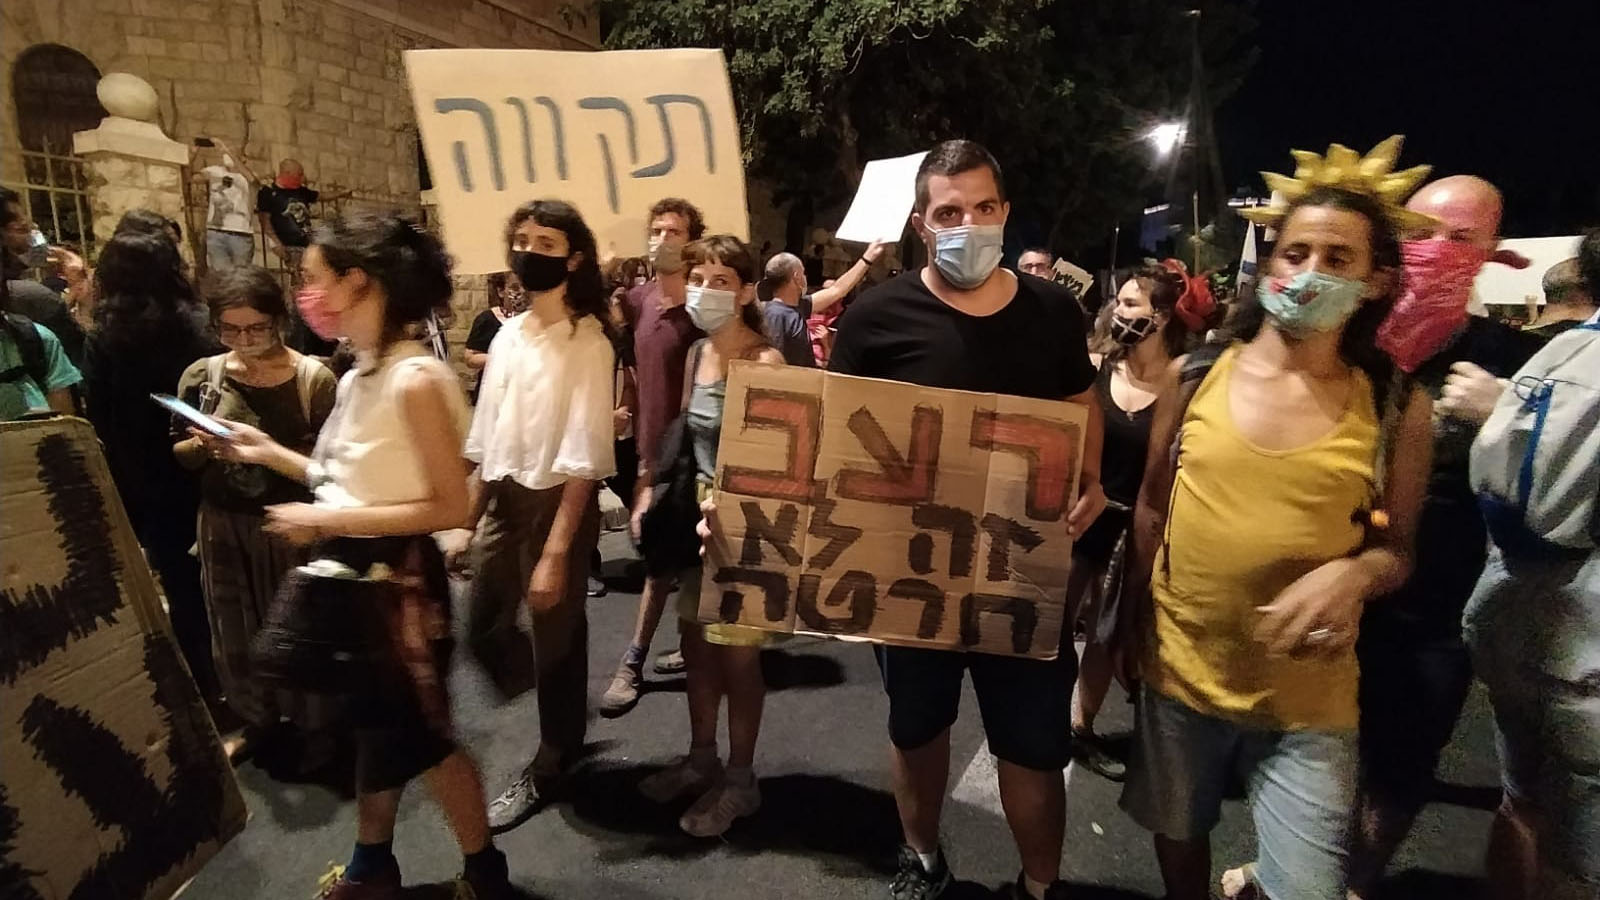 Elihai Amar, 25, from Sderot, came because he sees what is happening. (Photo: Yahel Faraj)